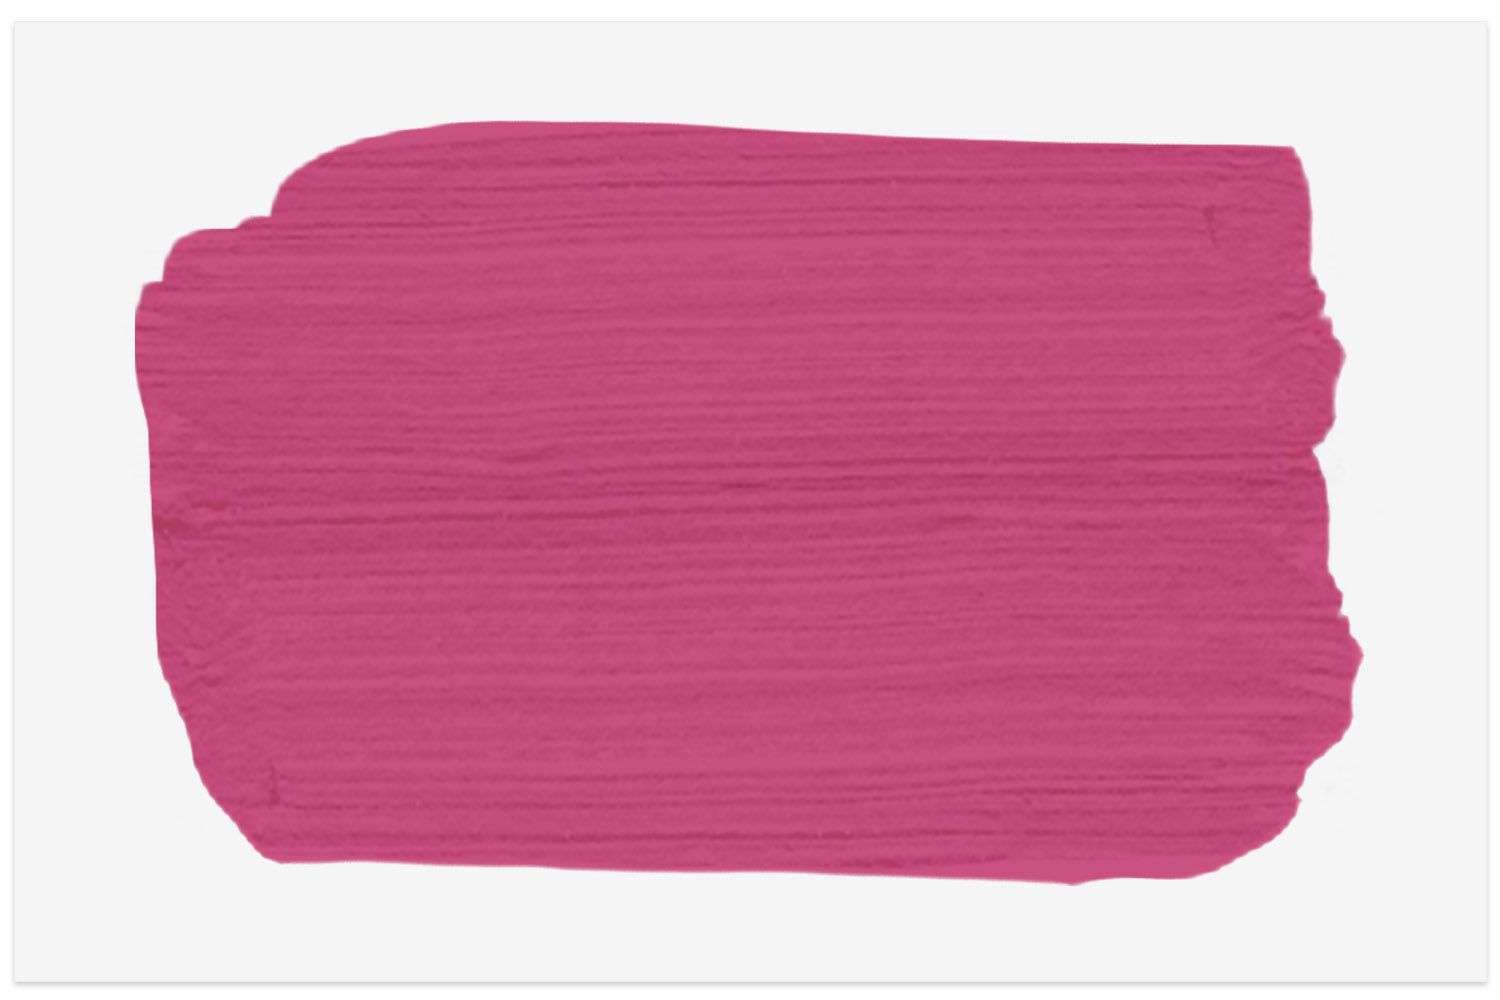 Berry : Razzle Dazzle paint swatch for little girls' room